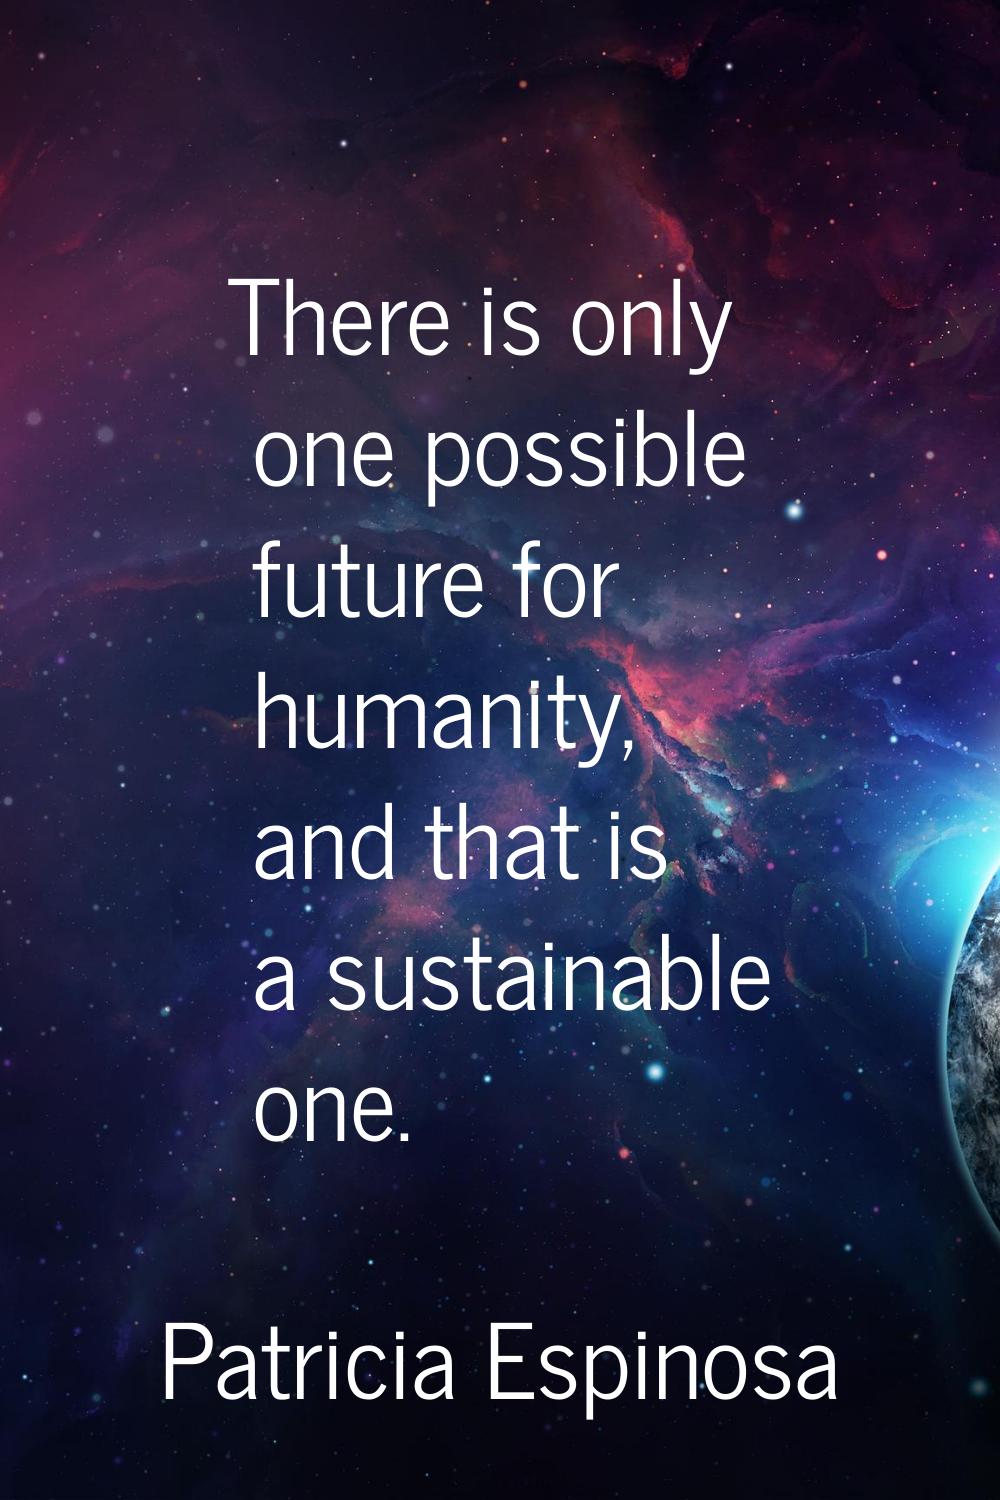 There is only one possible future for humanity, and that is a sustainable one.